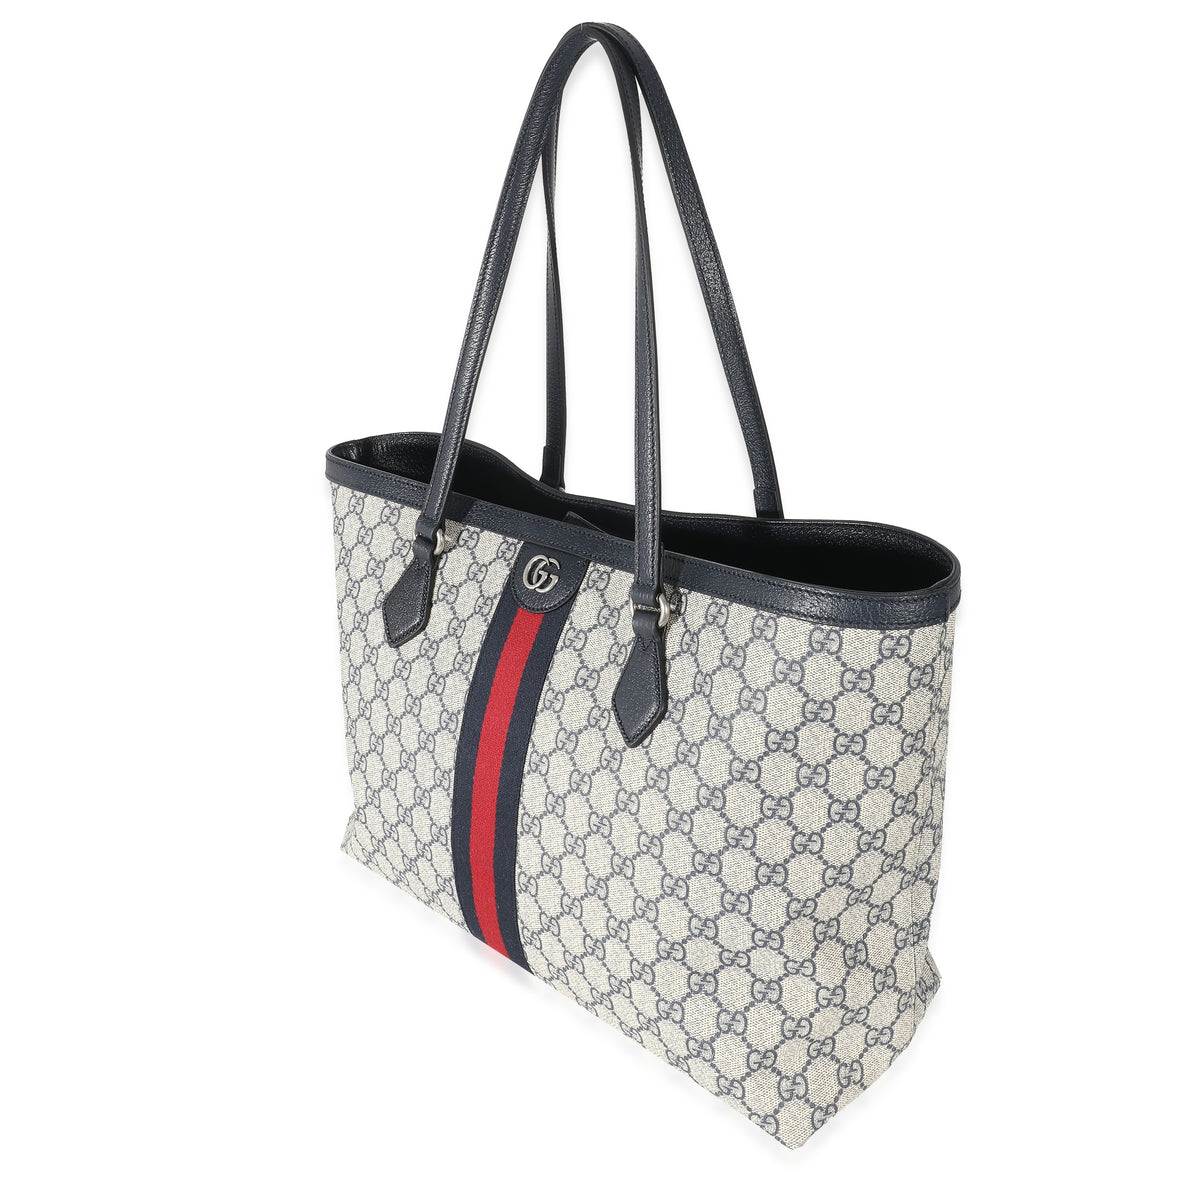 Ophidia medium tote bag in beige and blue Supreme